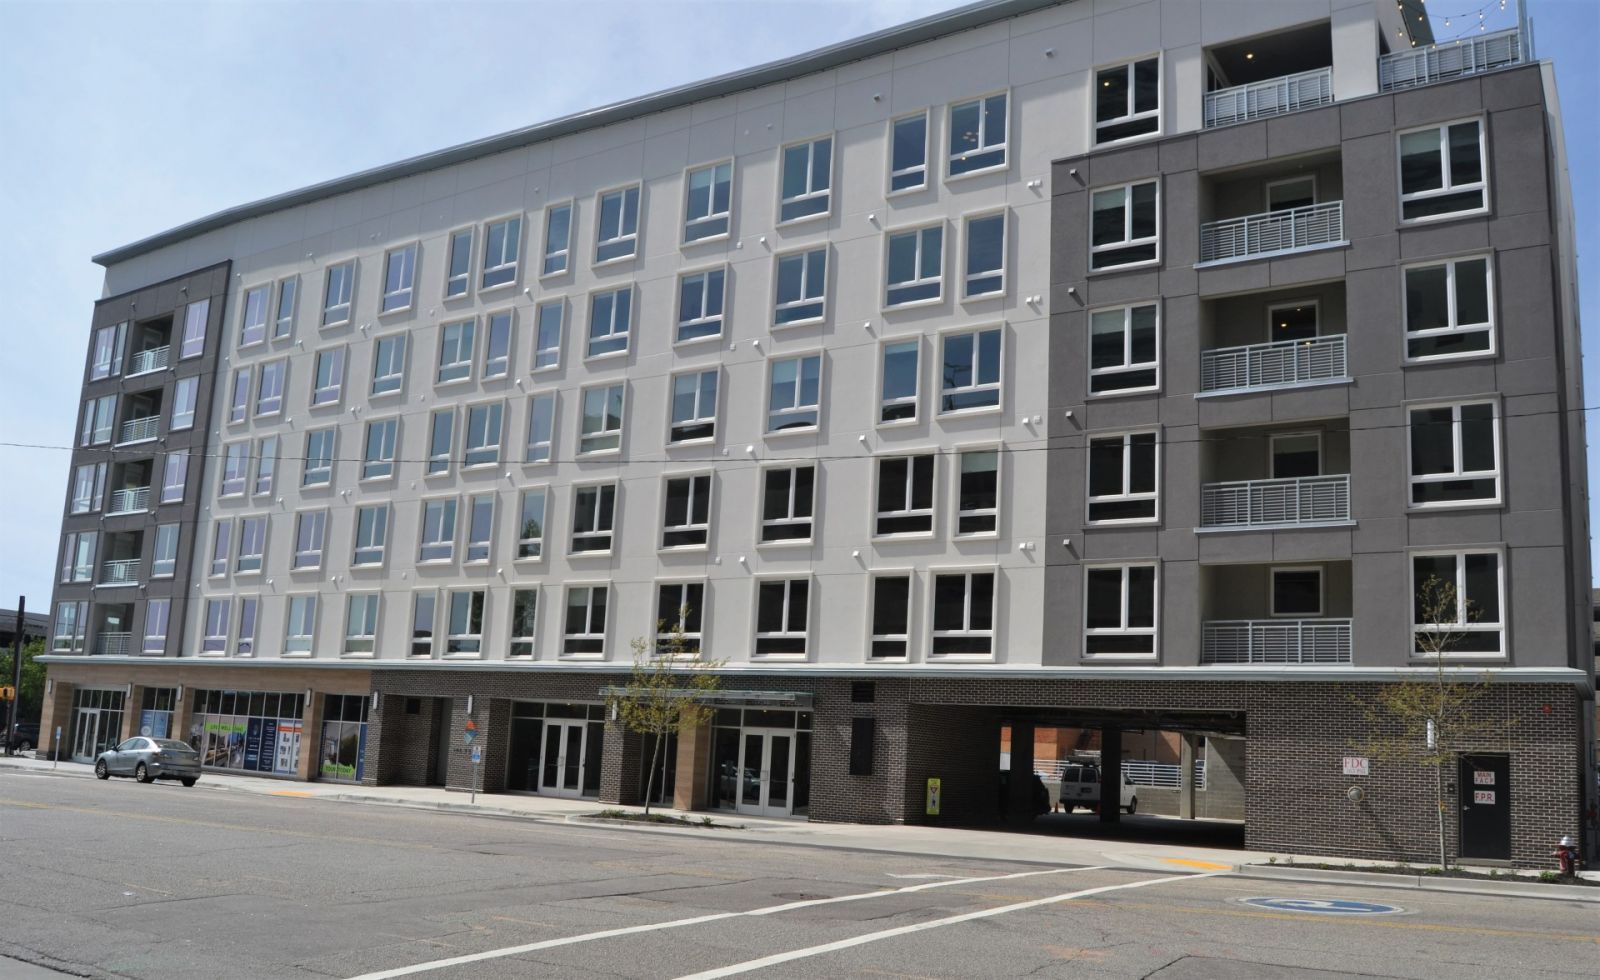 The Palms, an 83-unit luxury apartment building at the corner of Lady and Assembly streets, celebrated its grand opening on March 11. (Photo/Melinda Waldrop)